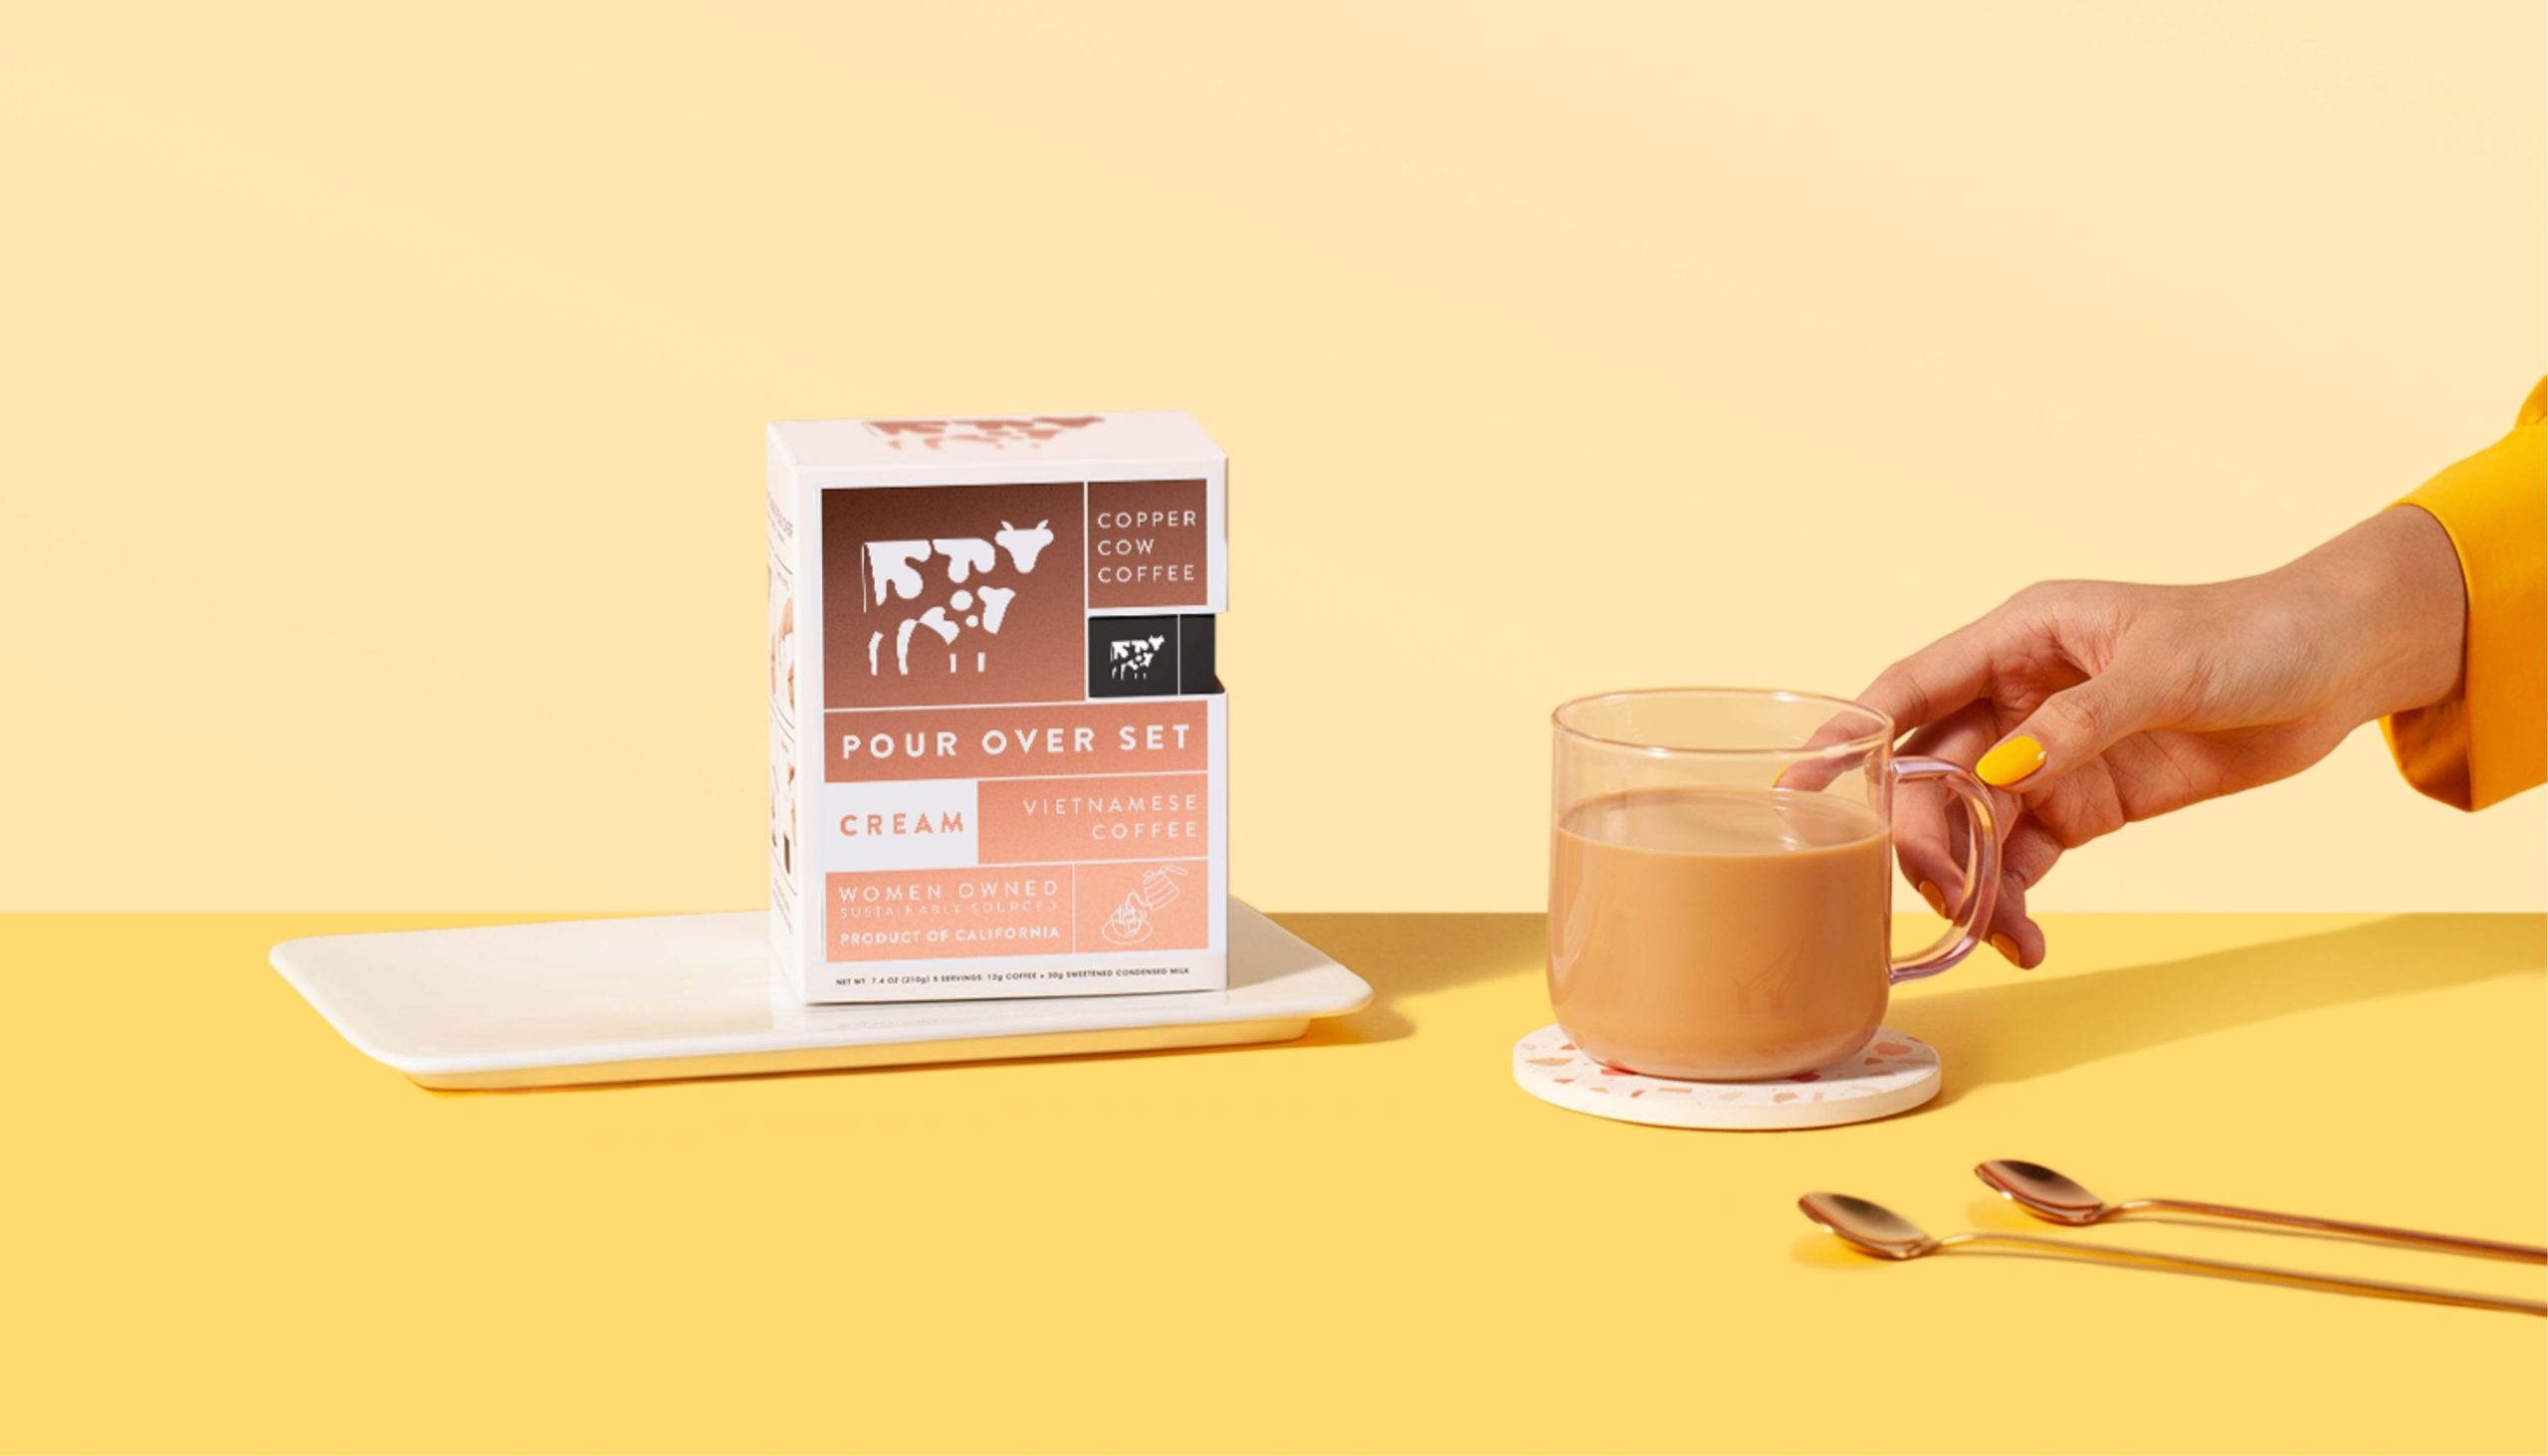 $8.5M in funding pours in for Copper Cow Coffee as coffee at home surges